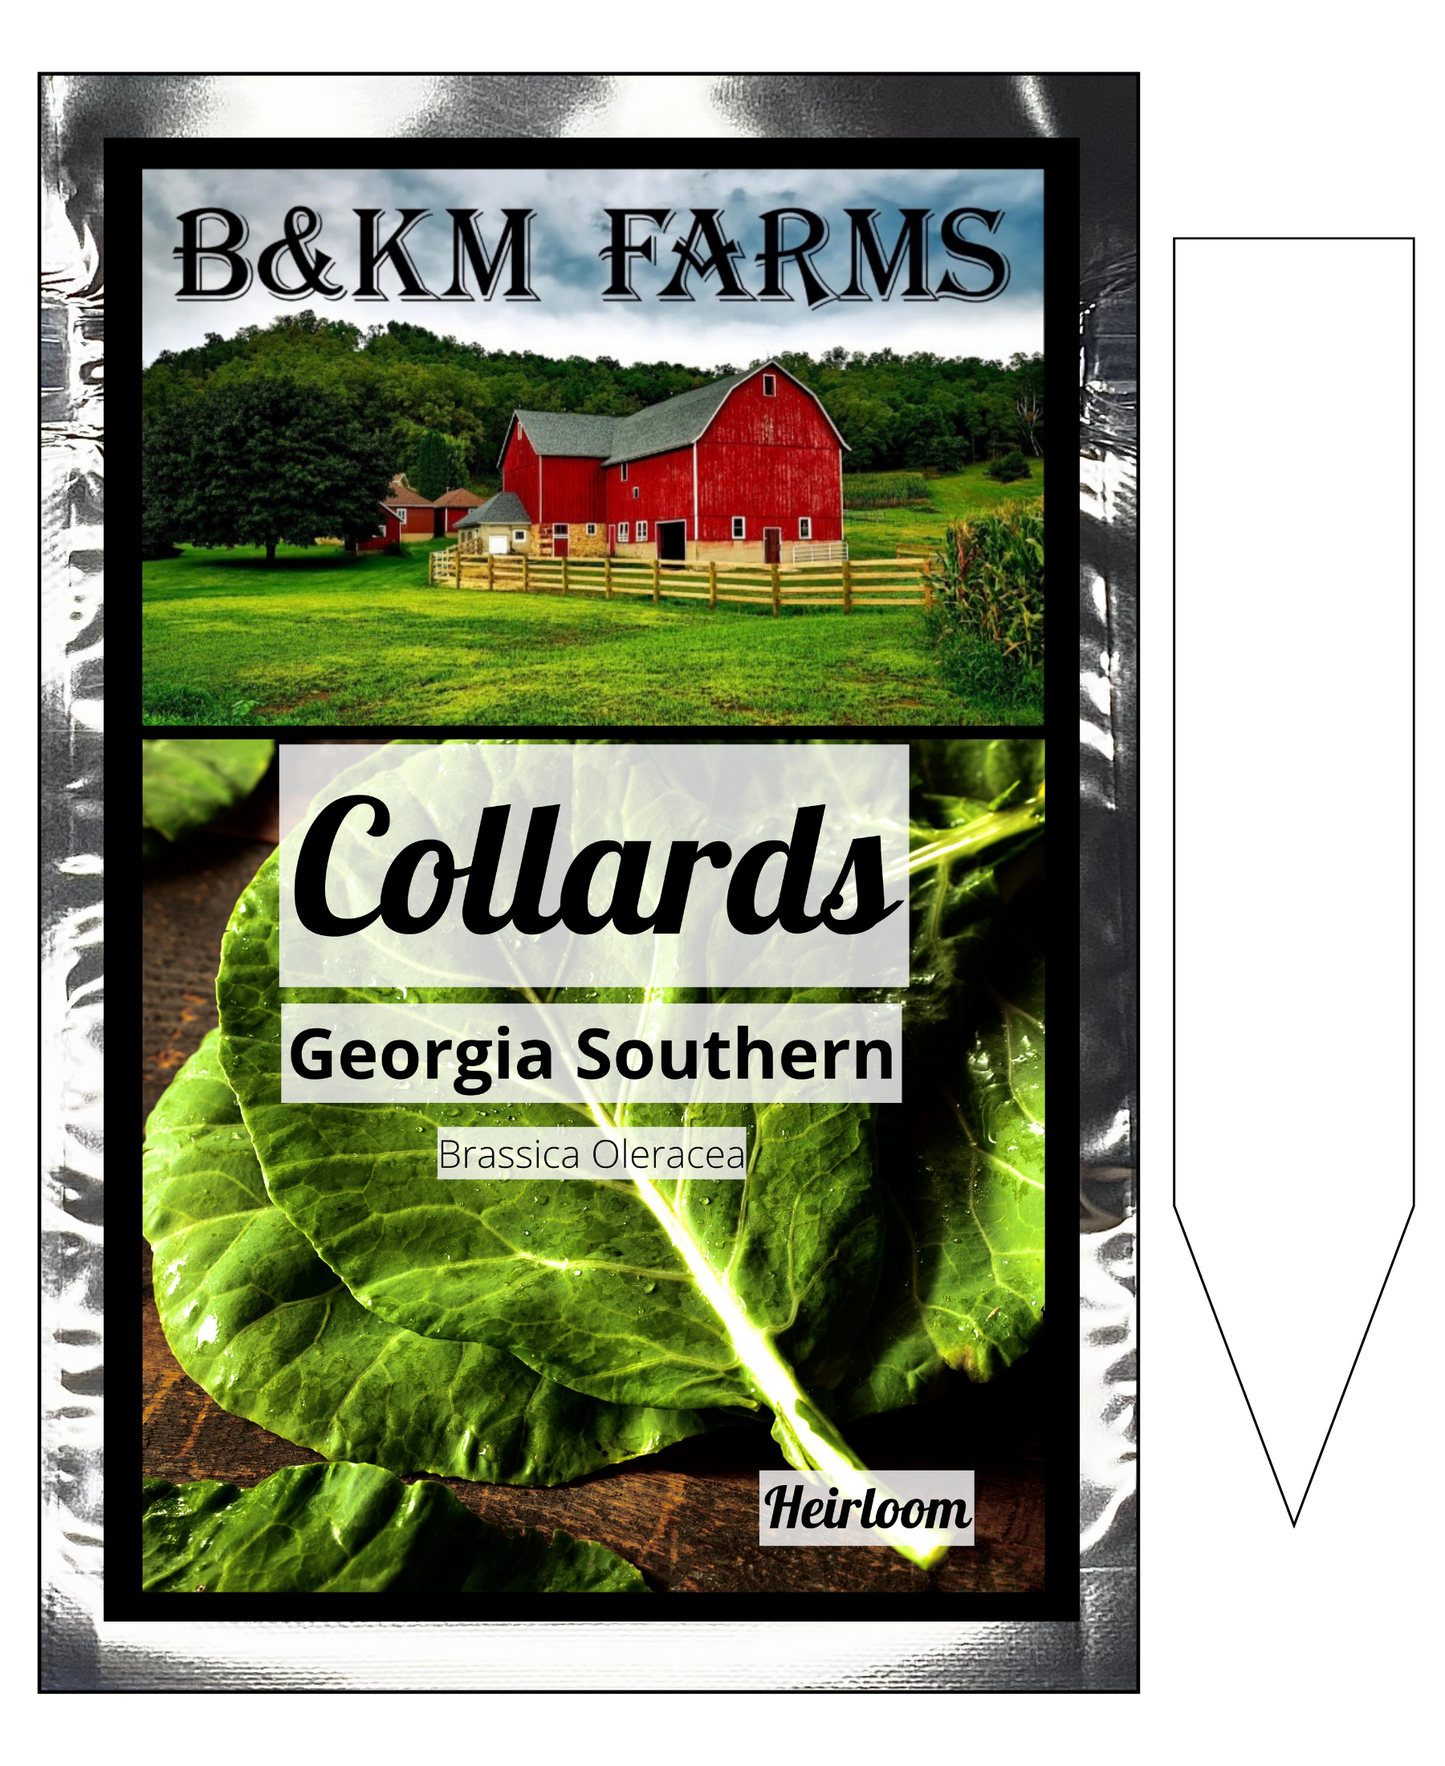 Collards Vates: Southern Sunbeams on Your Plate